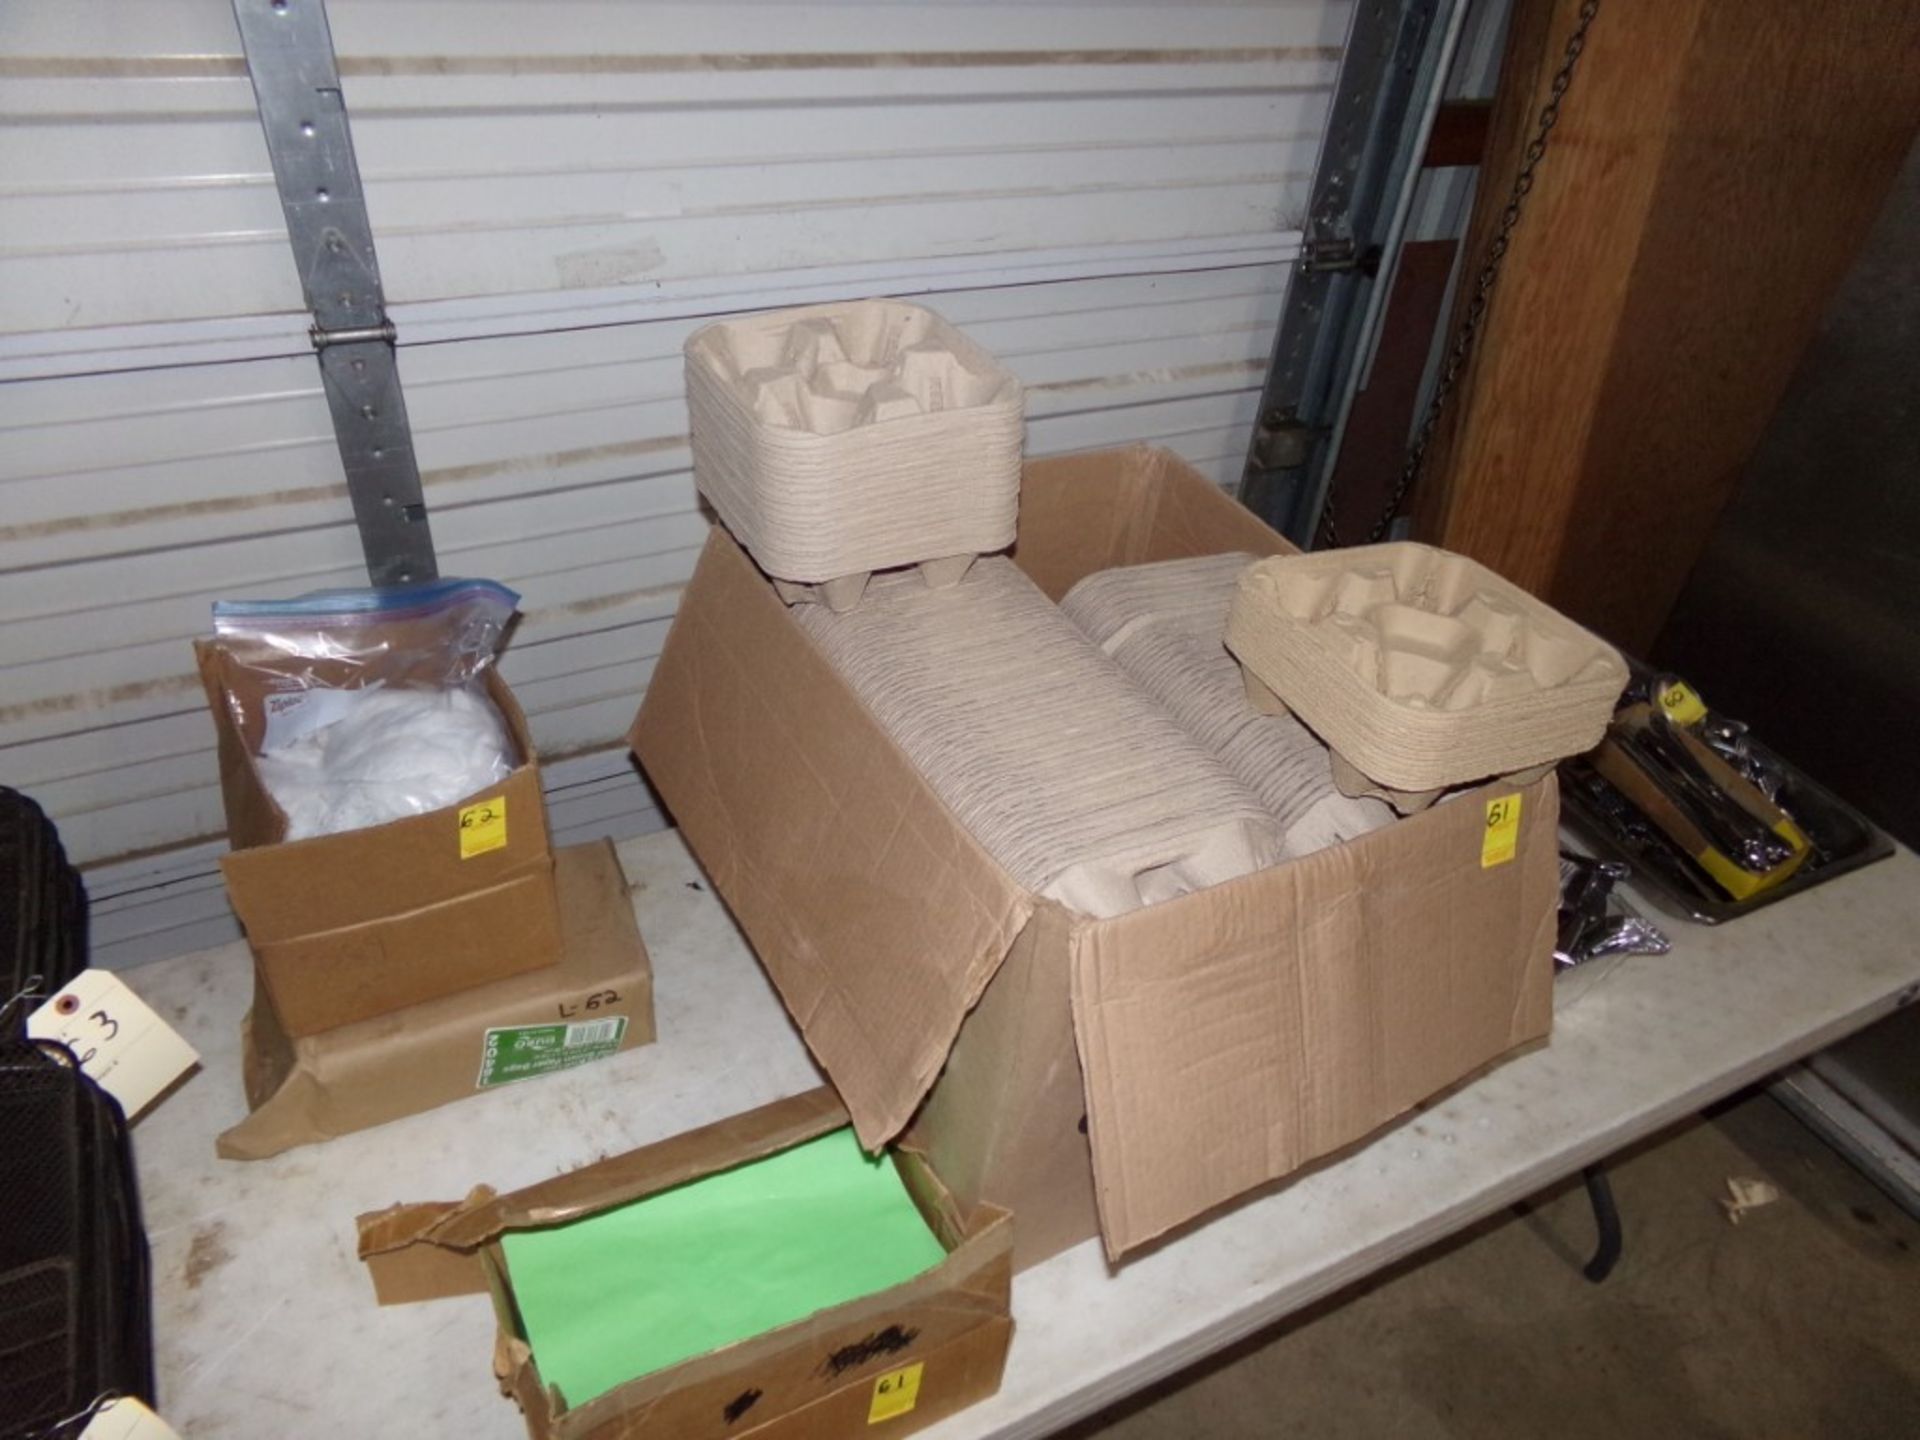 (4) Boxes of Paper Goods, Beard Nets, Drink Carriers, Paper Bags, 8 1/2 X 11 Green Paper